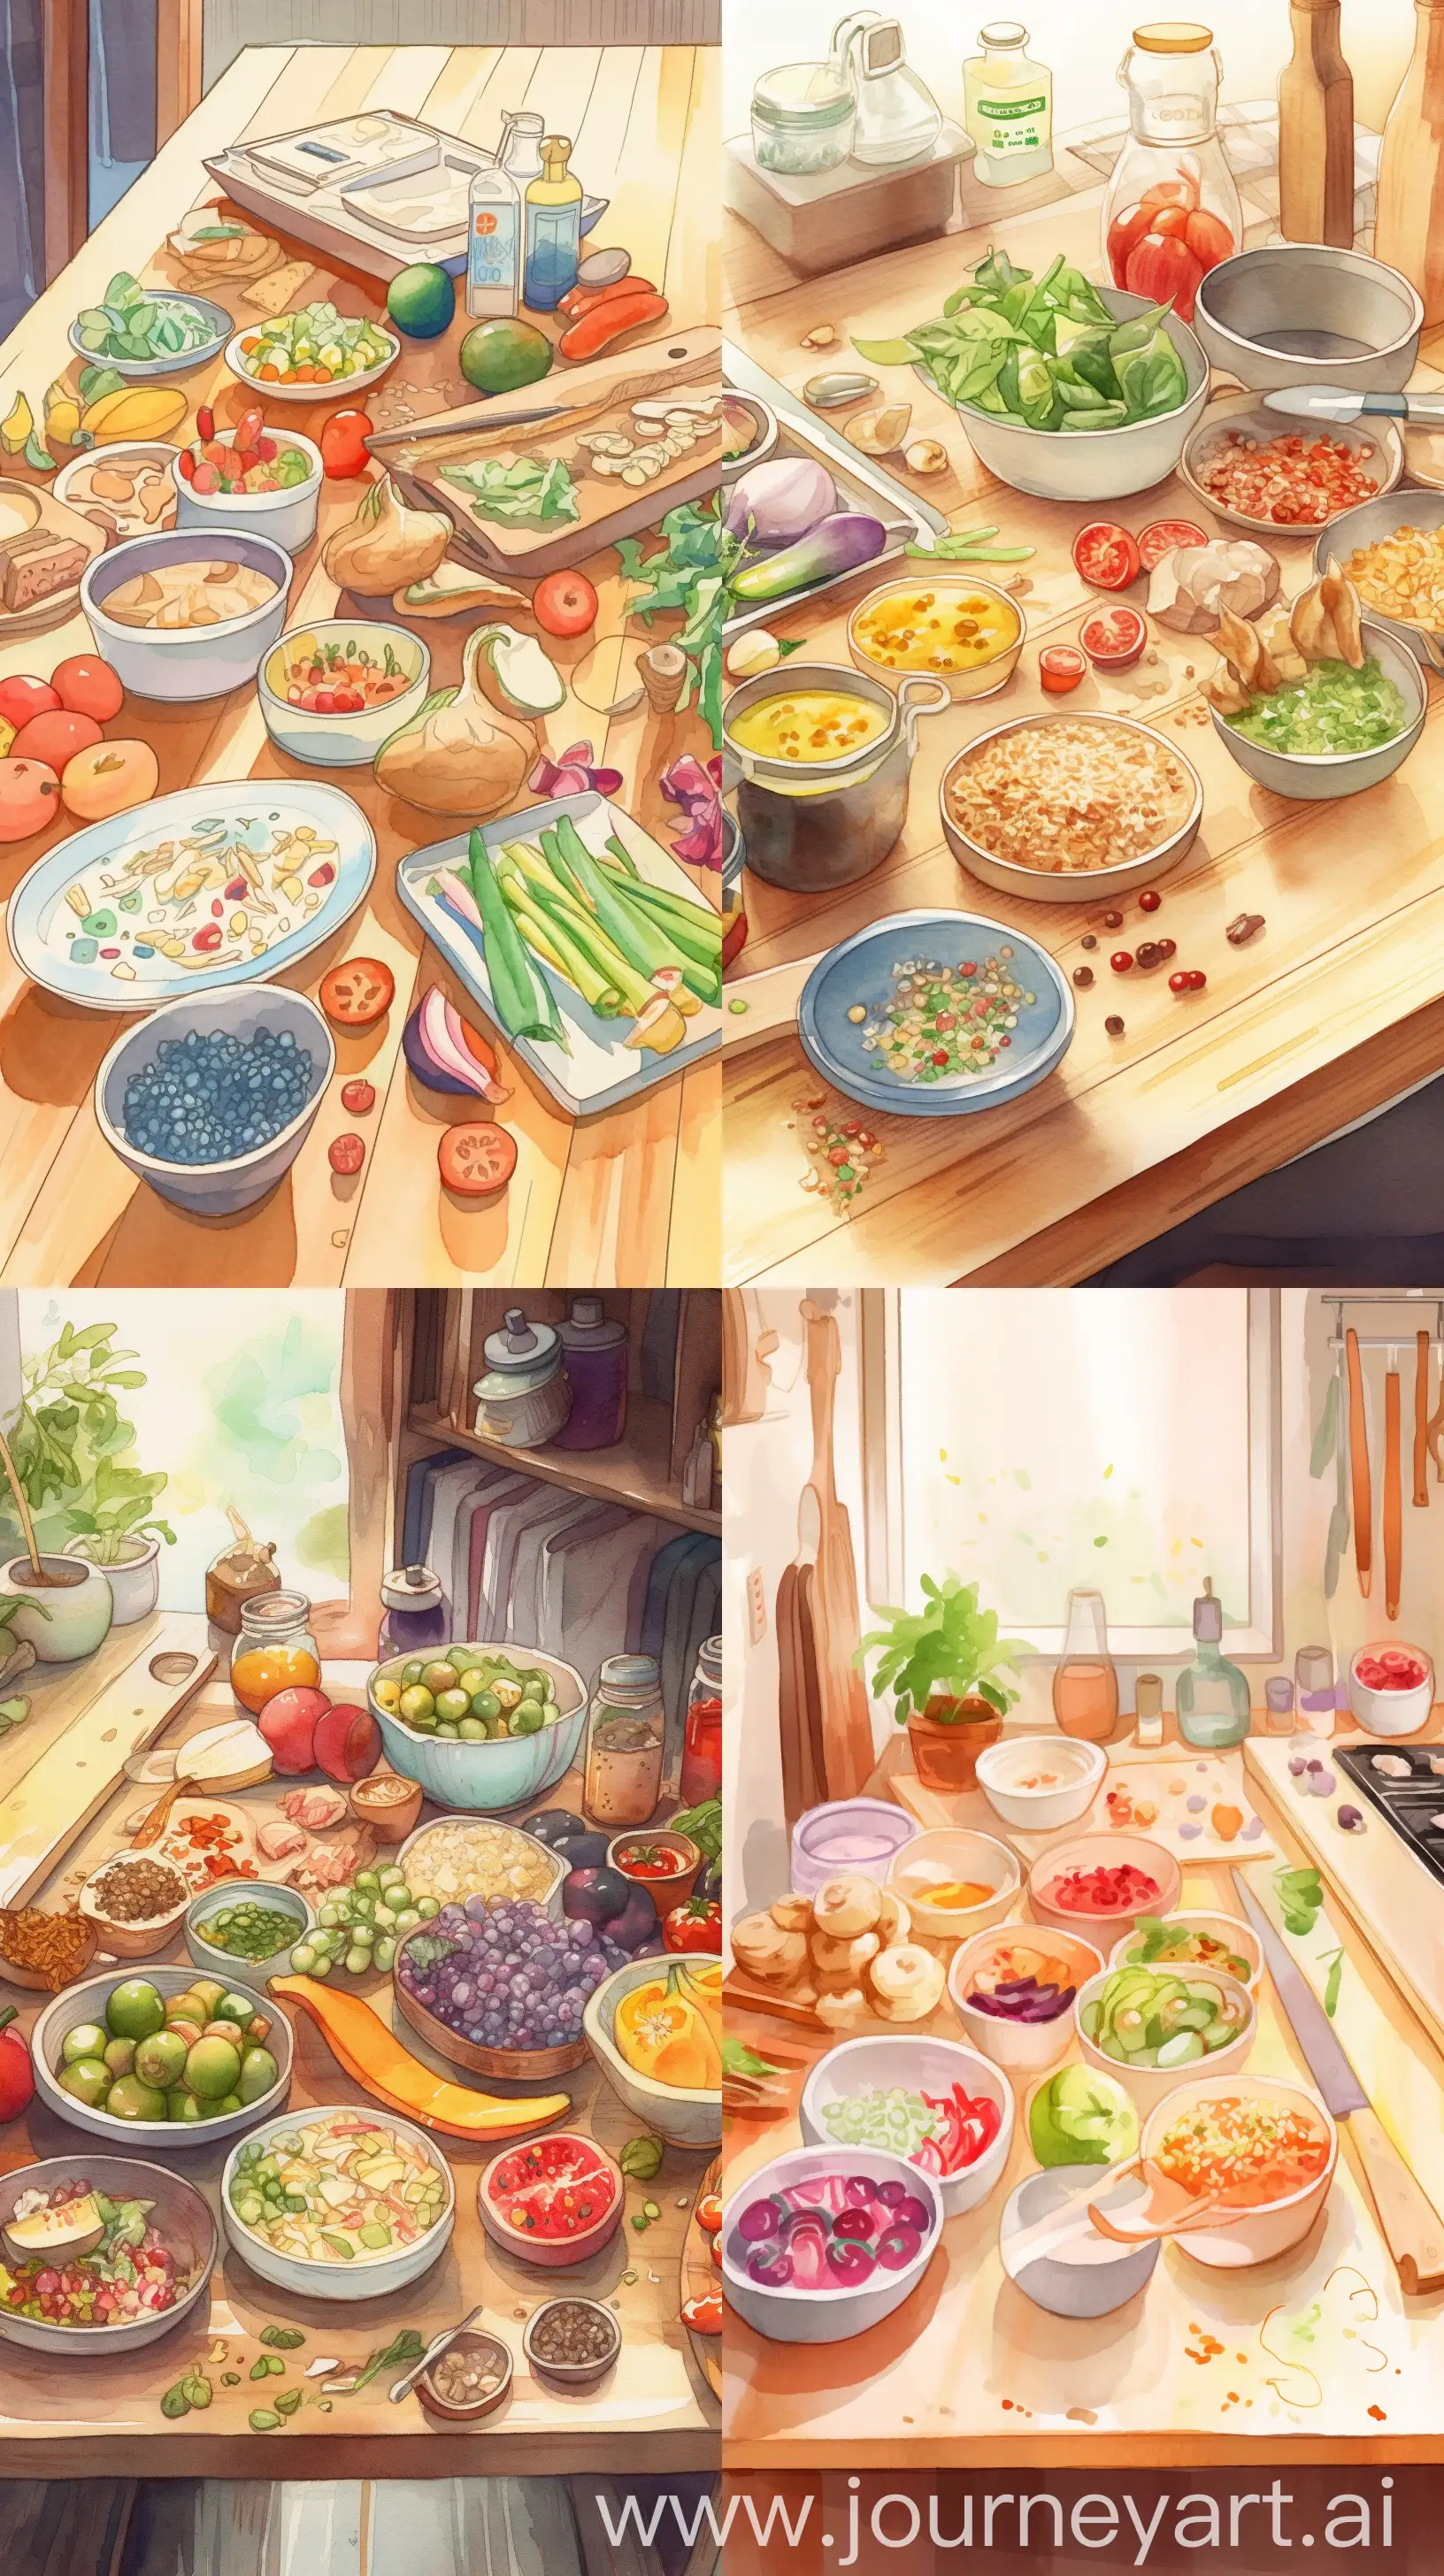 /imagine prompt: An eco-conscious cooking space with vibrant fruits and vegetables being chopped on a bamboo cutting board, reusable containers filled with grains and pulses, soft natural light, showcasing the harmony between culinary artistry and sustainability, Illustration, watercolor painting on textured paper, --ar 9:16 --v 5